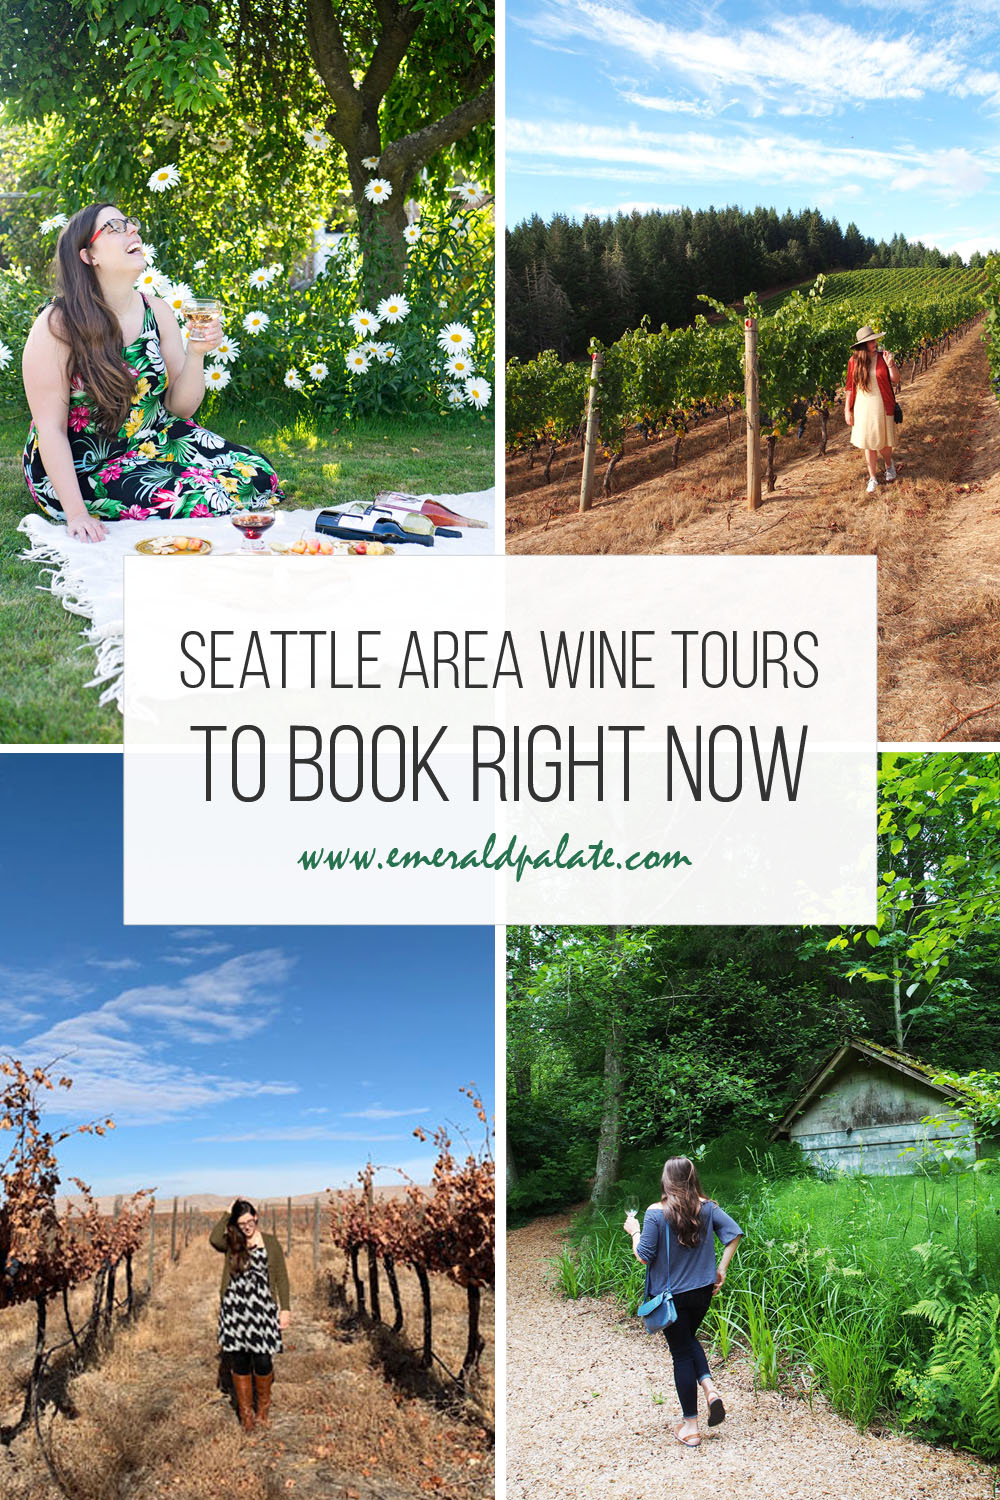 Wine tours in the Seattle area to book right now. If you are looking to explore wineries near Seattle but want to visit the best tasting rooms, try one of these winery tours that take you around different areas of Washington Wine Country.